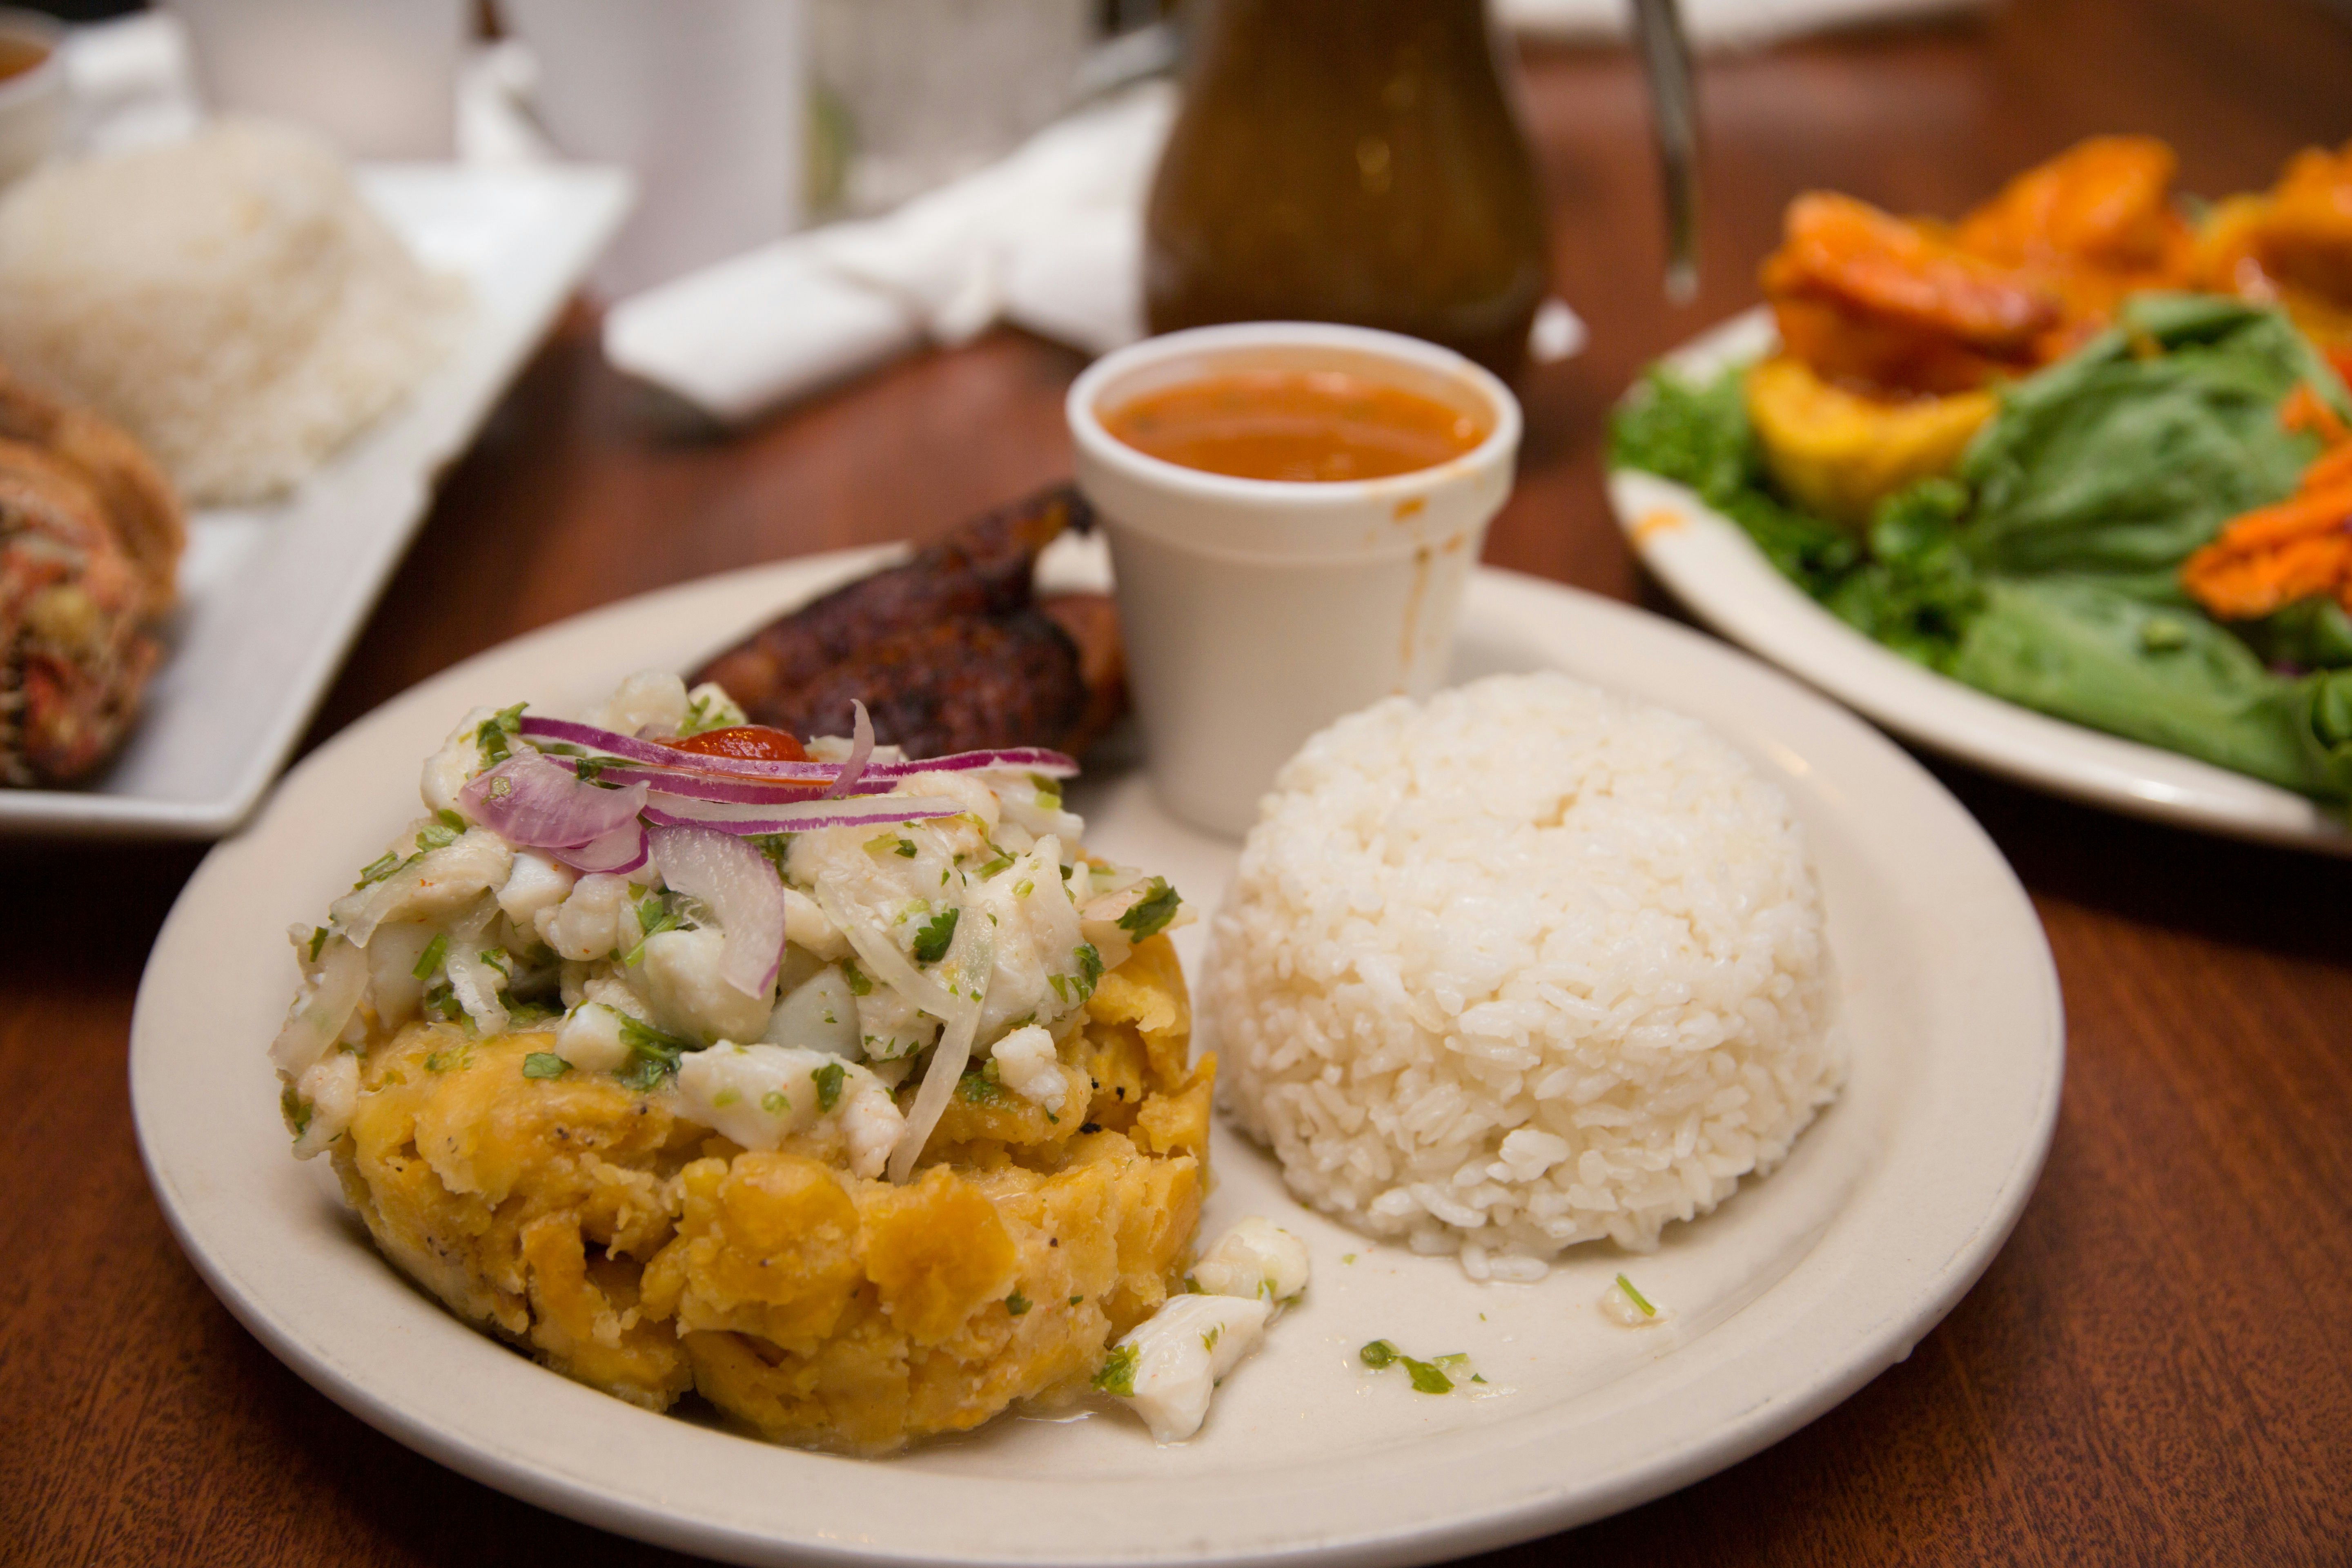 A plate of mofongo, a Puerto Rican dish made of fried plantain topped with meat. The food is on a circular plate resting on a tabletop.